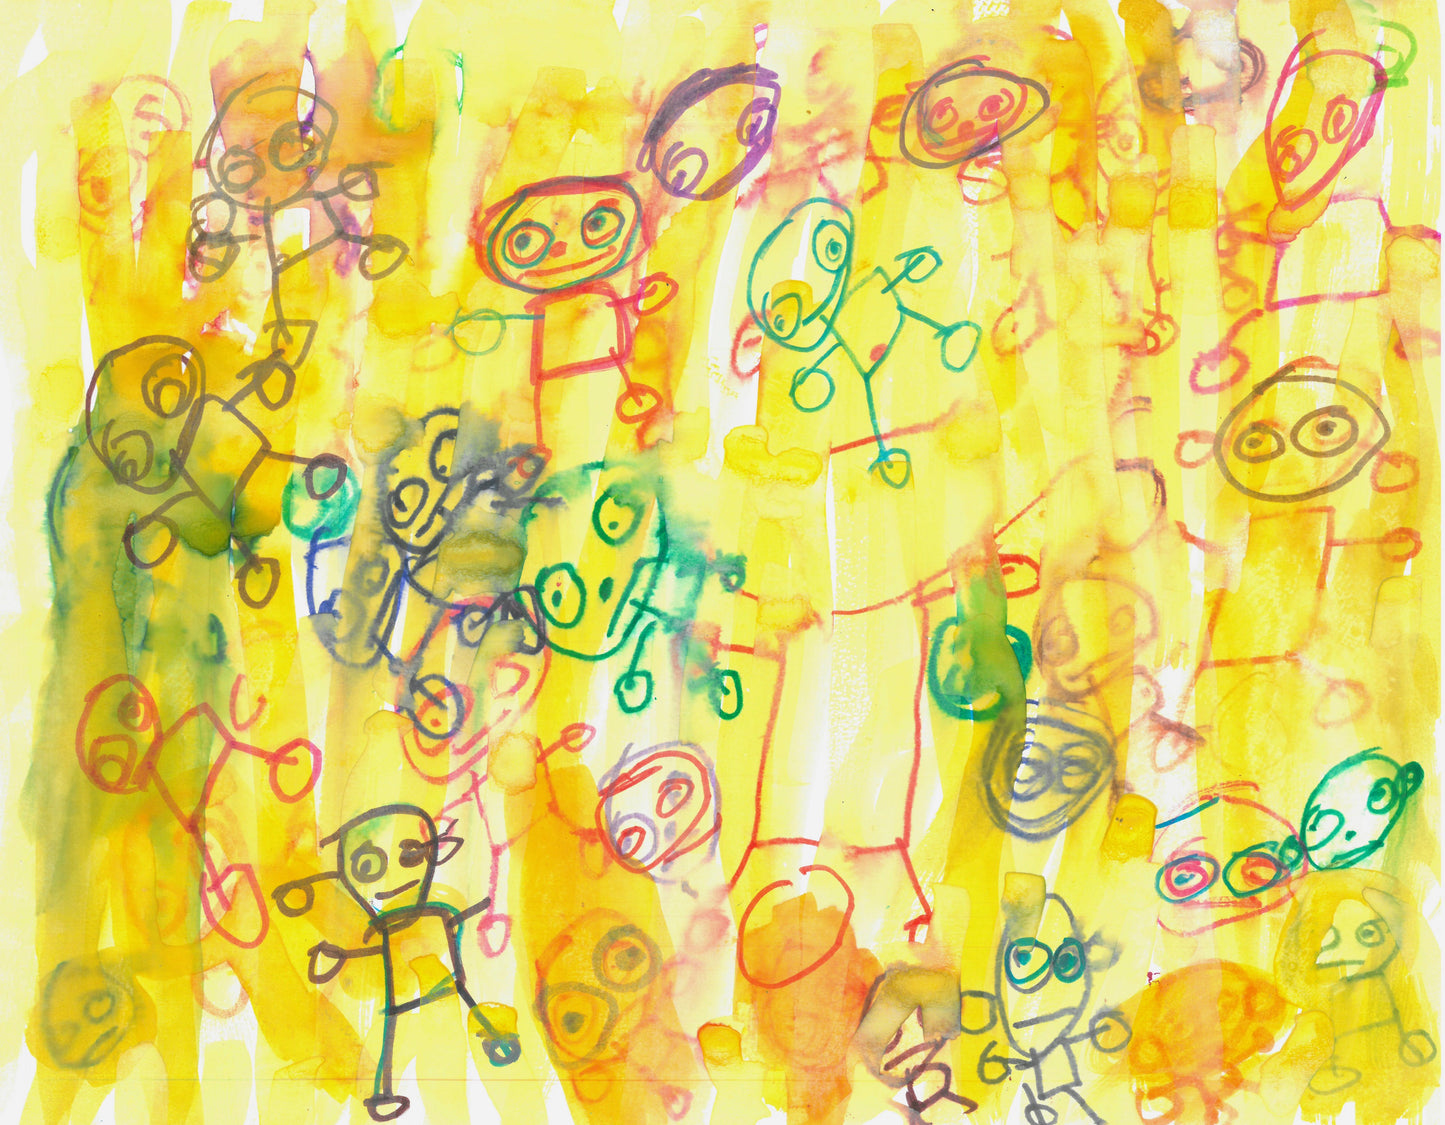 This is a painting with a yellow background and several abstract drawings of people.